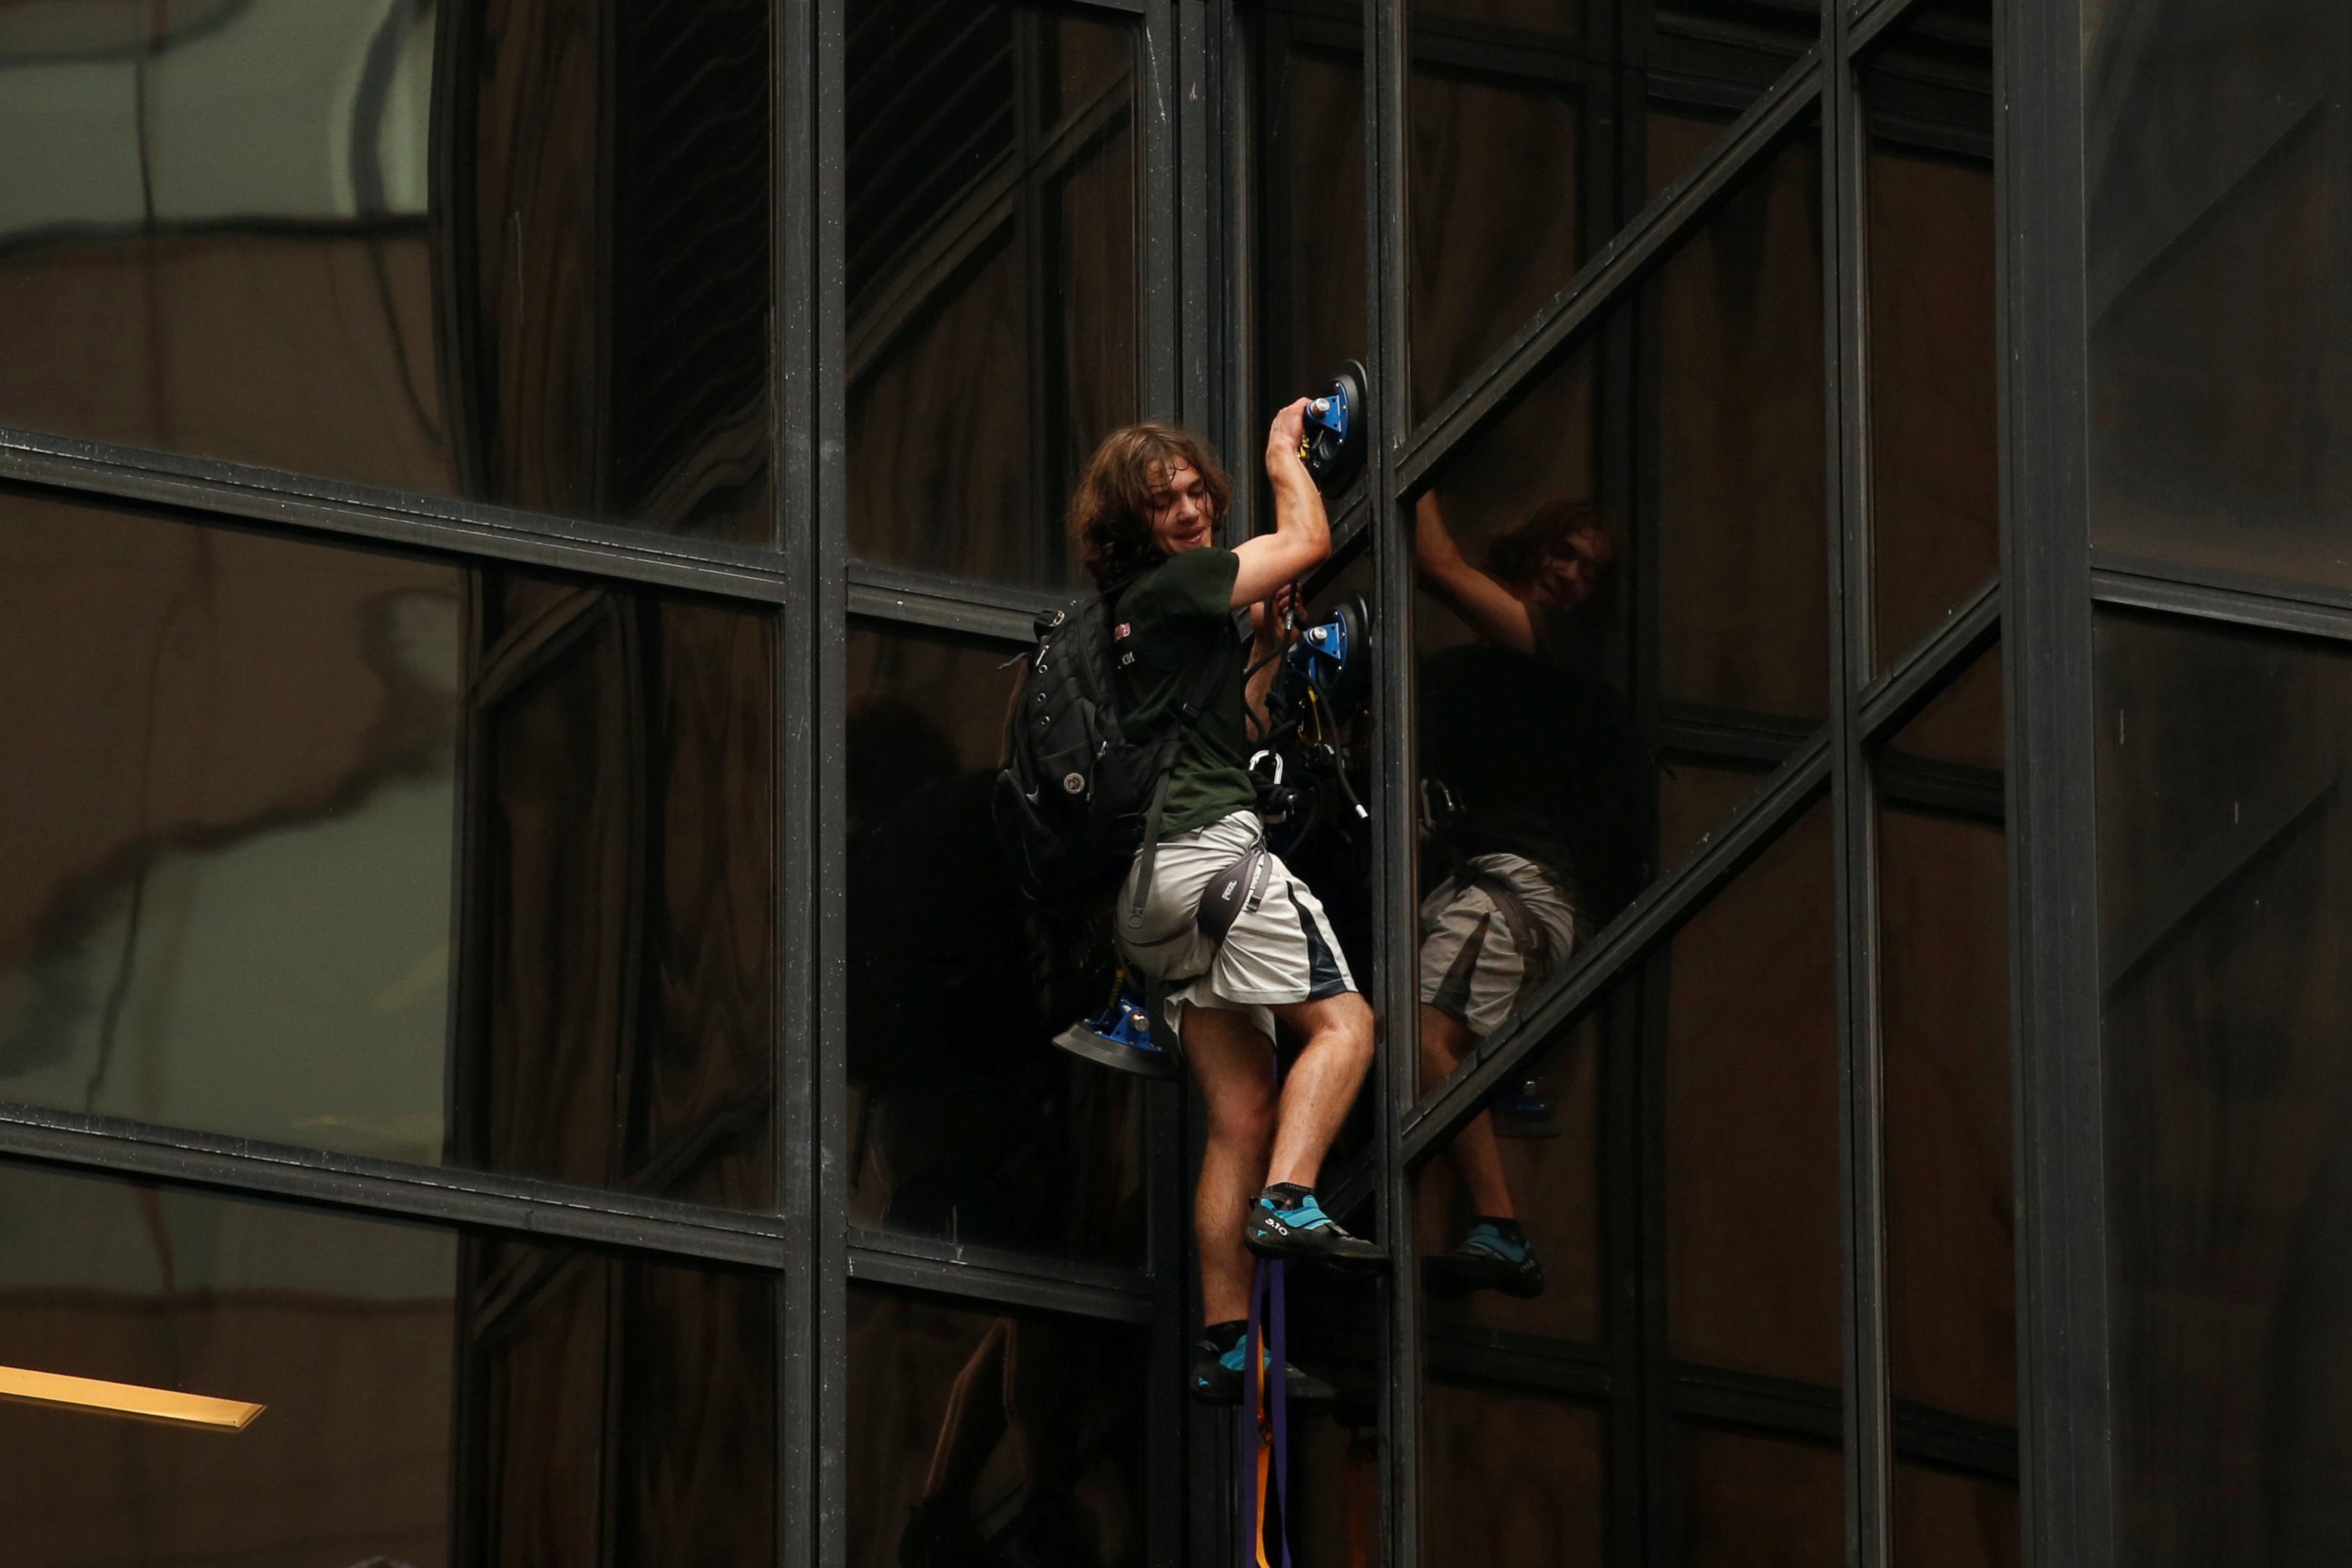 PHOTO: A man climbs the outside of Trump Tower in New York, Aug. 10, 2016.  